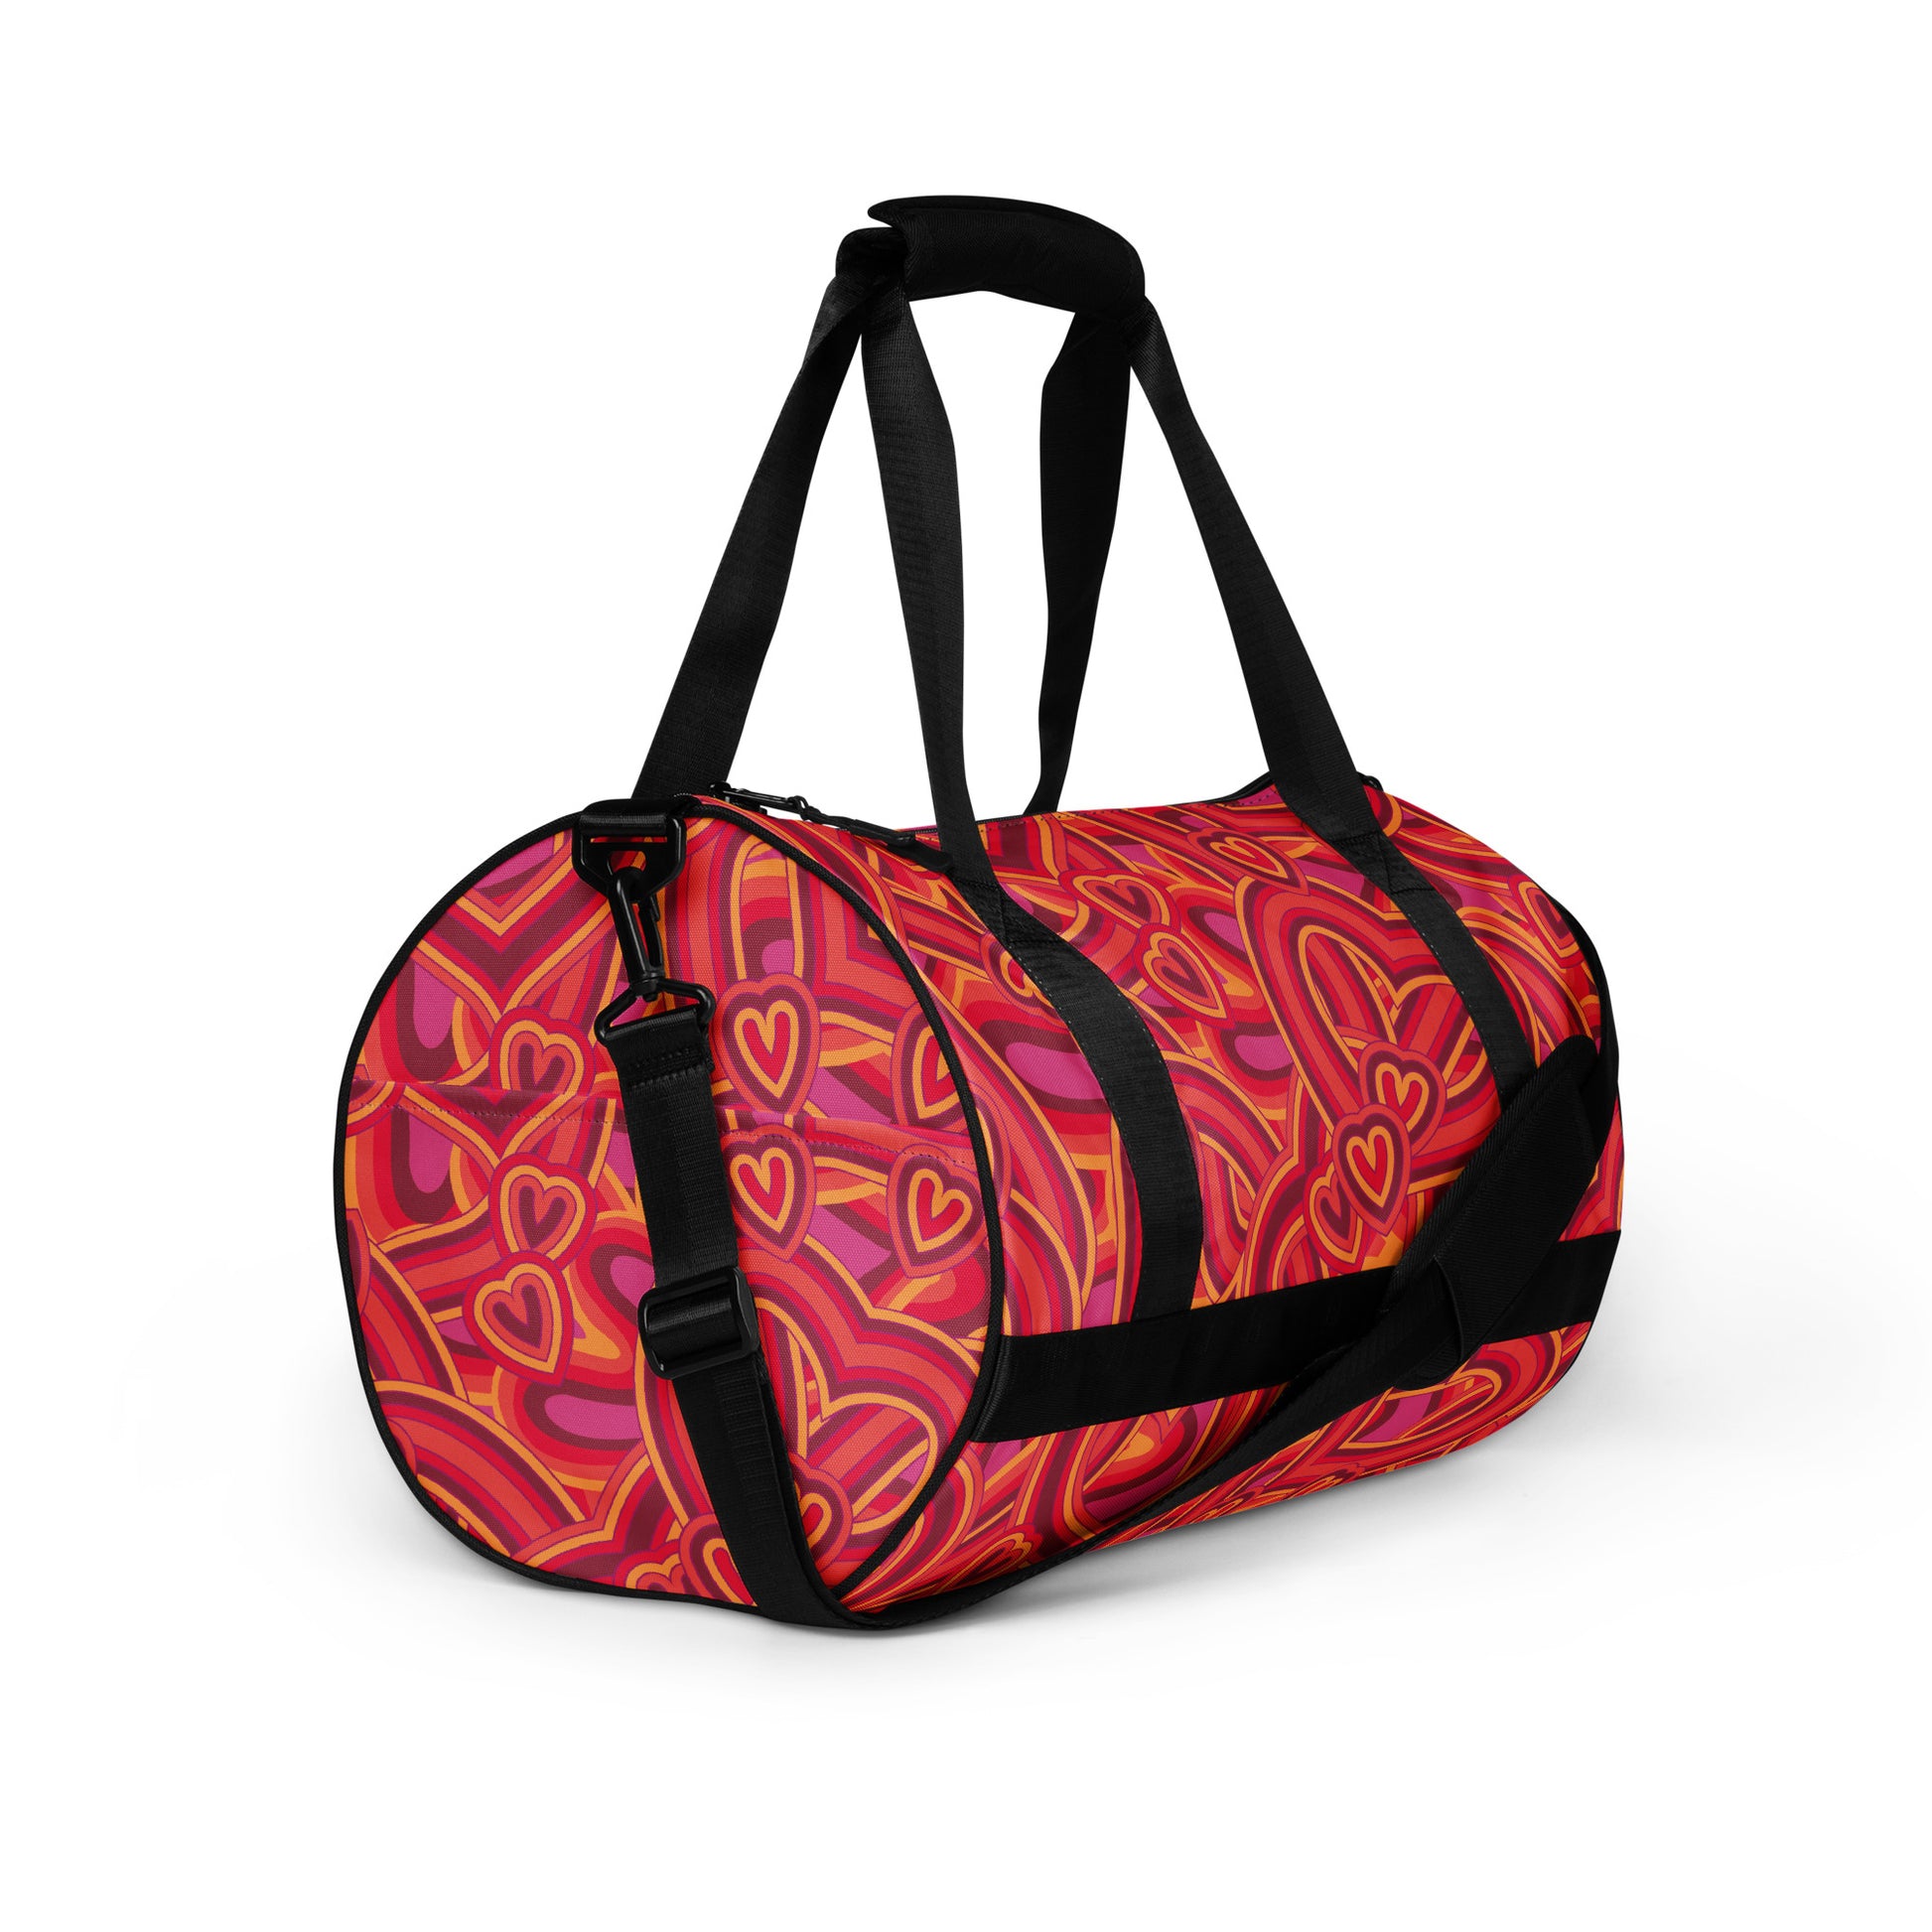 TIME OF VIBES - Sports Bag FULL OF LOVE - €85.00